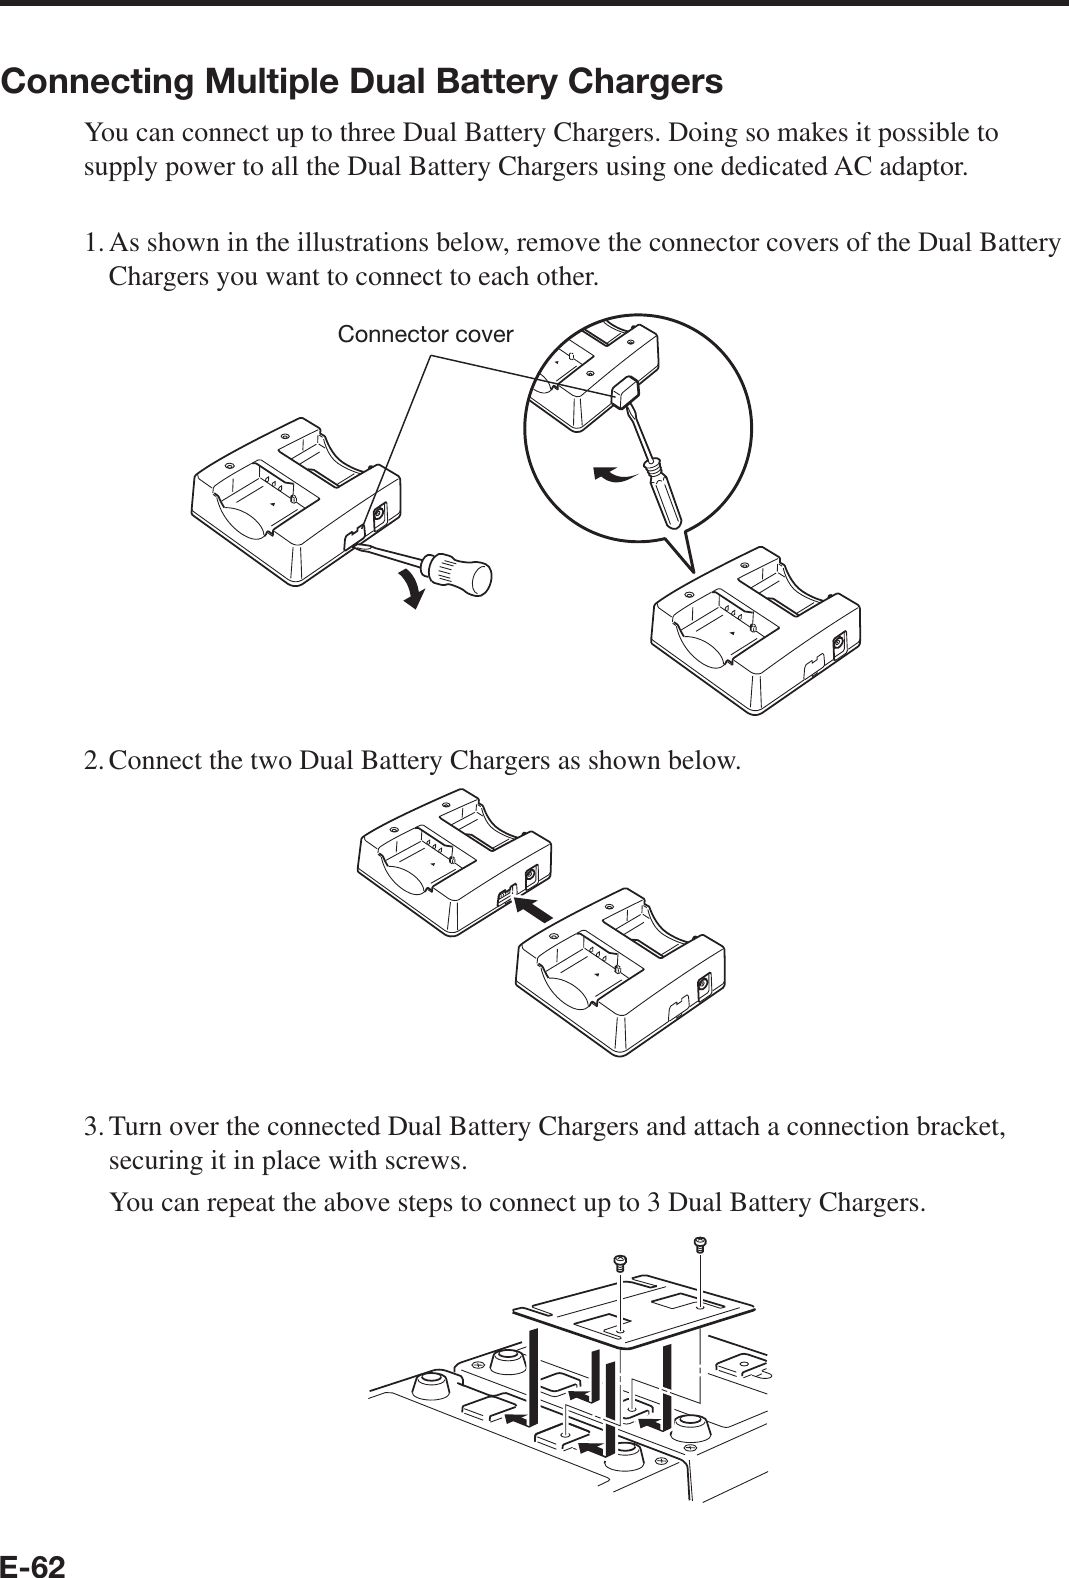 E-62Connecting Multiple Dual Battery ChargersYou can connect up to three Dual Battery Chargers. Doing so makes it possible to supply power to all the Dual Battery Chargers using one dedicated AC adaptor.1. As shown in the illustrations below, remove the connector covers of the Dual Battery Chargers you want to connect to each other.Connector cover2. Connect the two Dual Battery Chargers as shown below.3. Turn over the connected Dual Battery Chargers and attach a connection bracket, securing it in place with screws.  You can repeat the above steps to connect up to 3 Dual Battery Chargers.